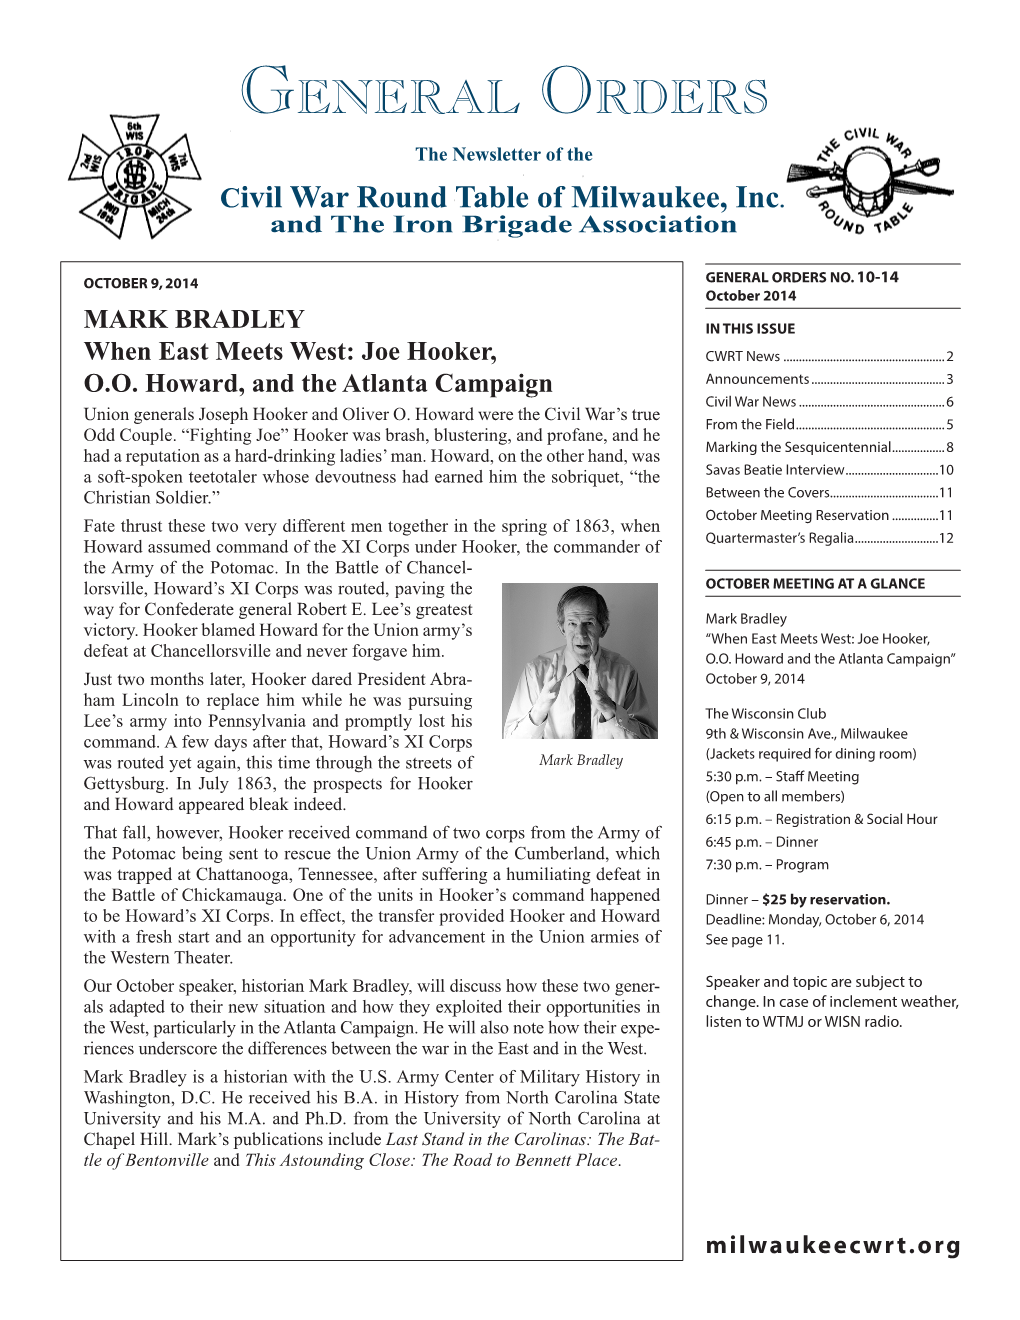 General Orders the Newsletter of the Civil War Round Table of Milwaukee, Inc